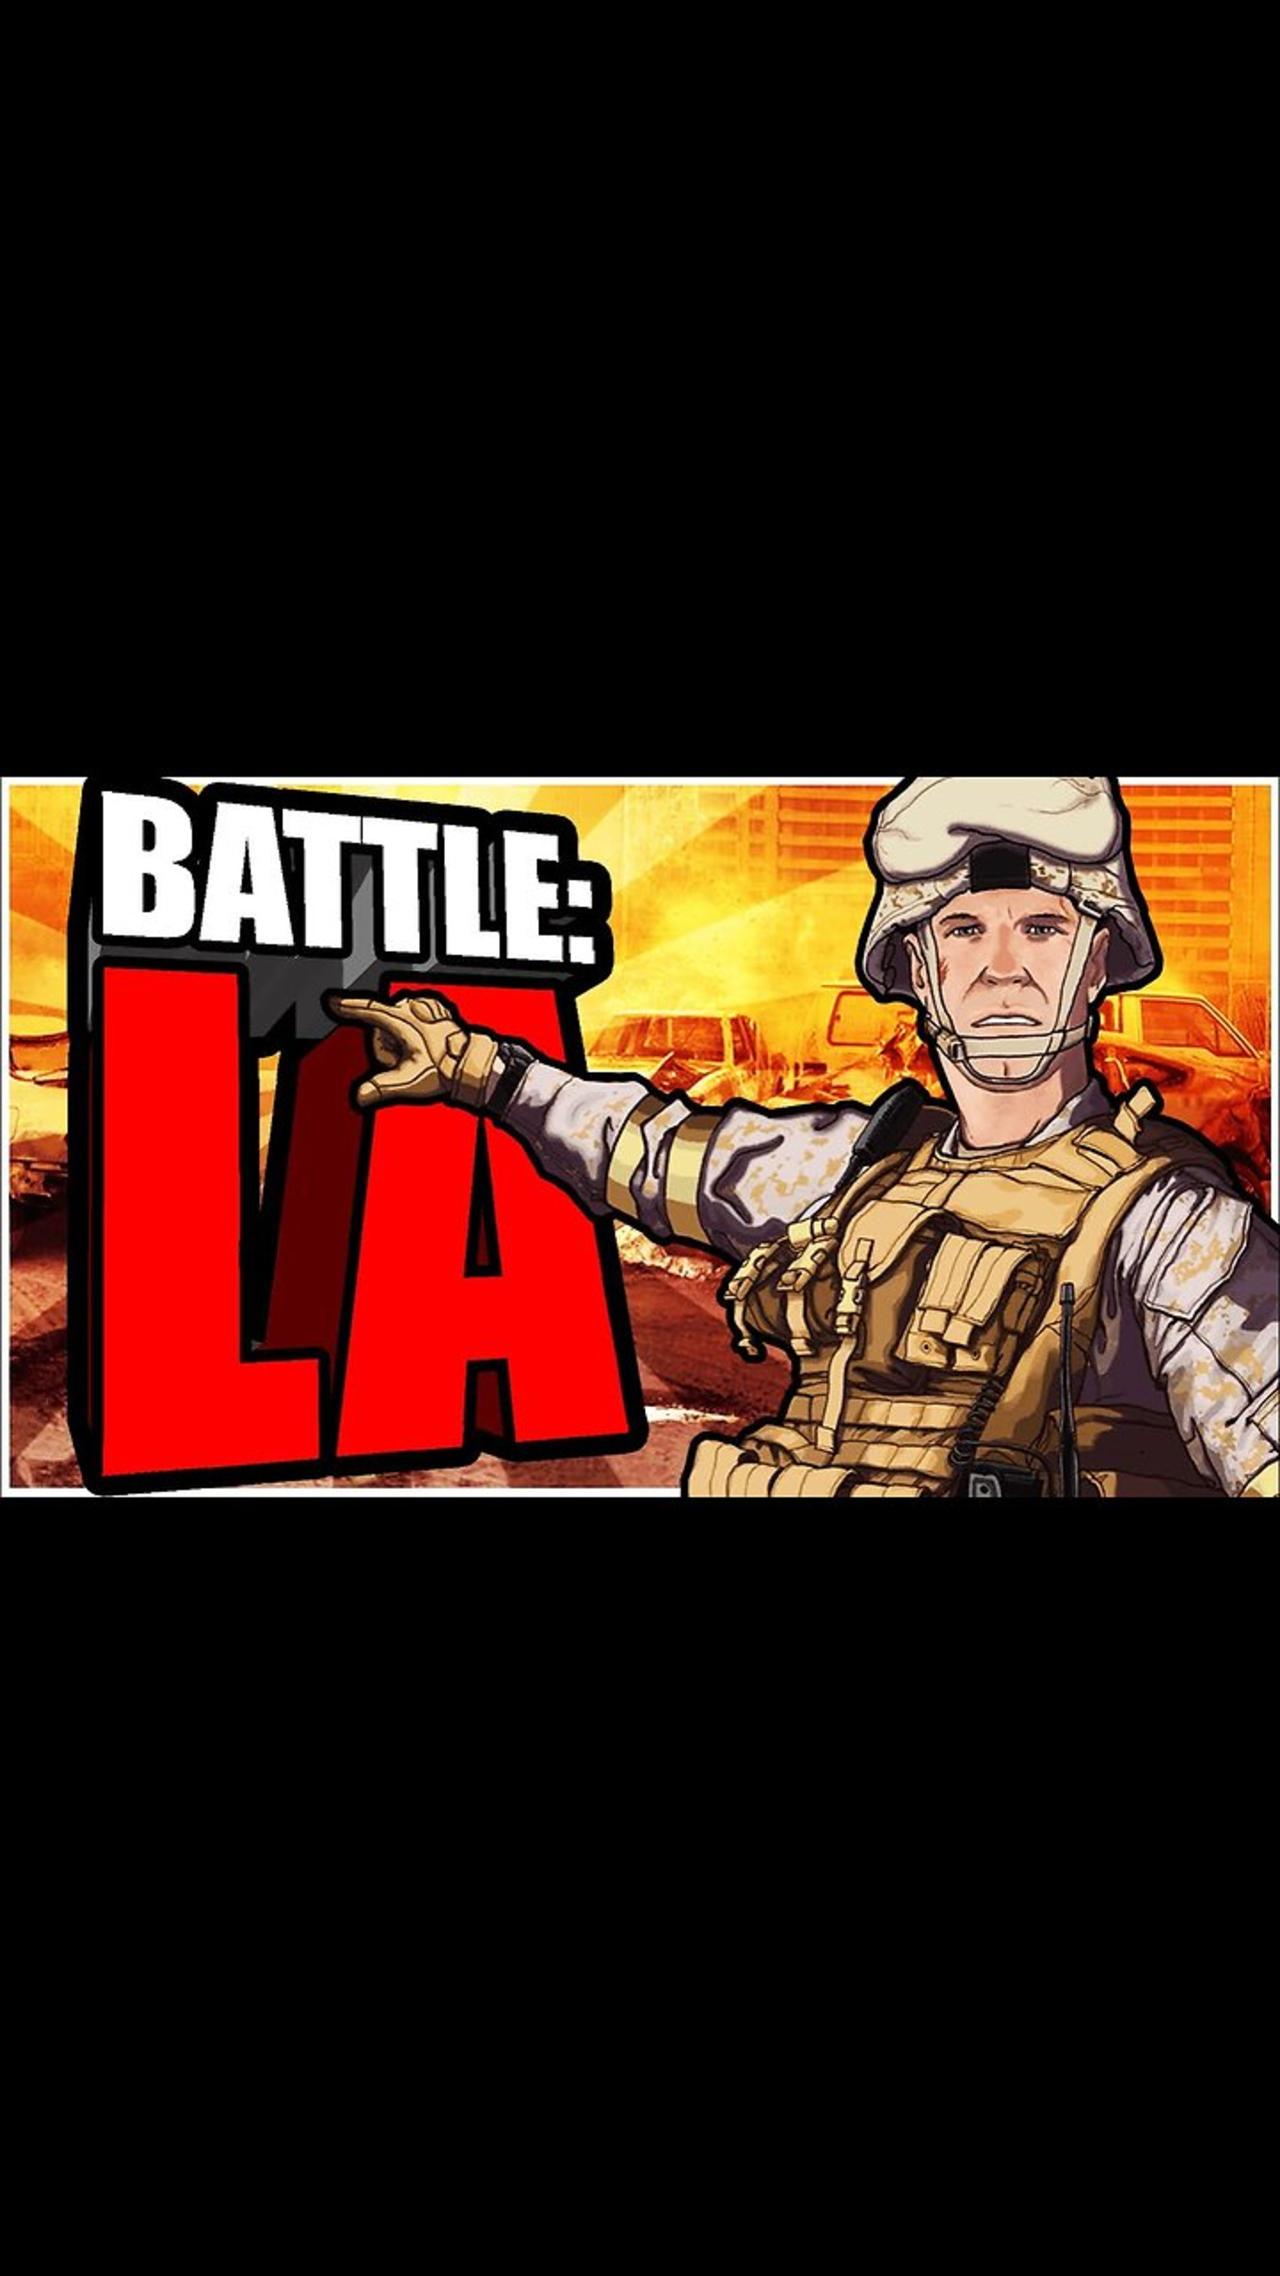 Firestorm Battle Los Angeles - Ignite the Conflict, Secure the City! 🔥